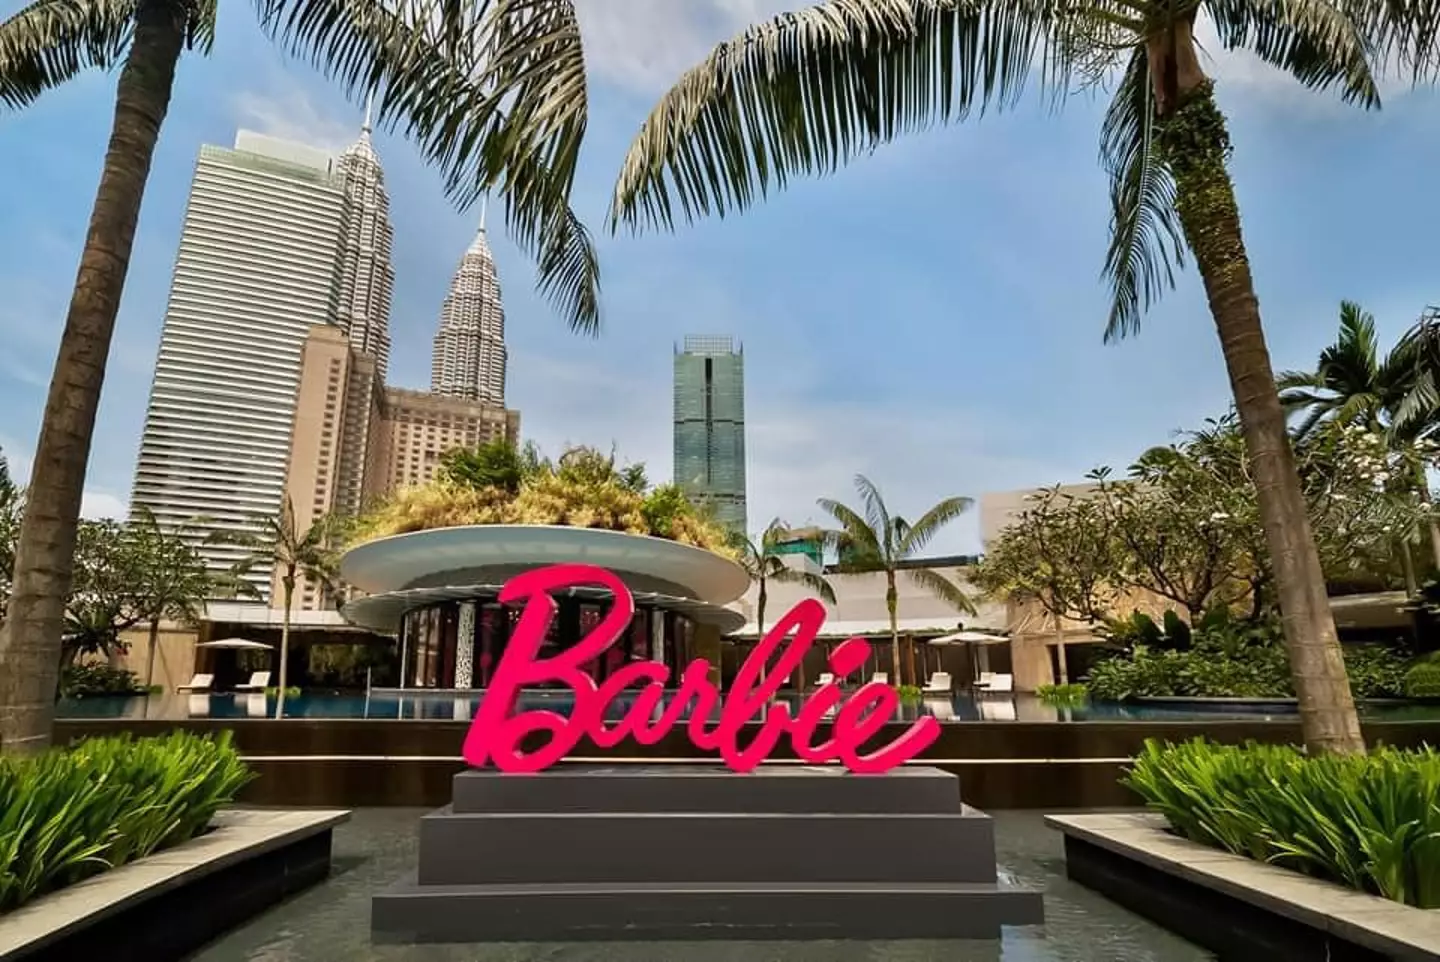 This Barbie-themed hotel is set to open this weekend. (